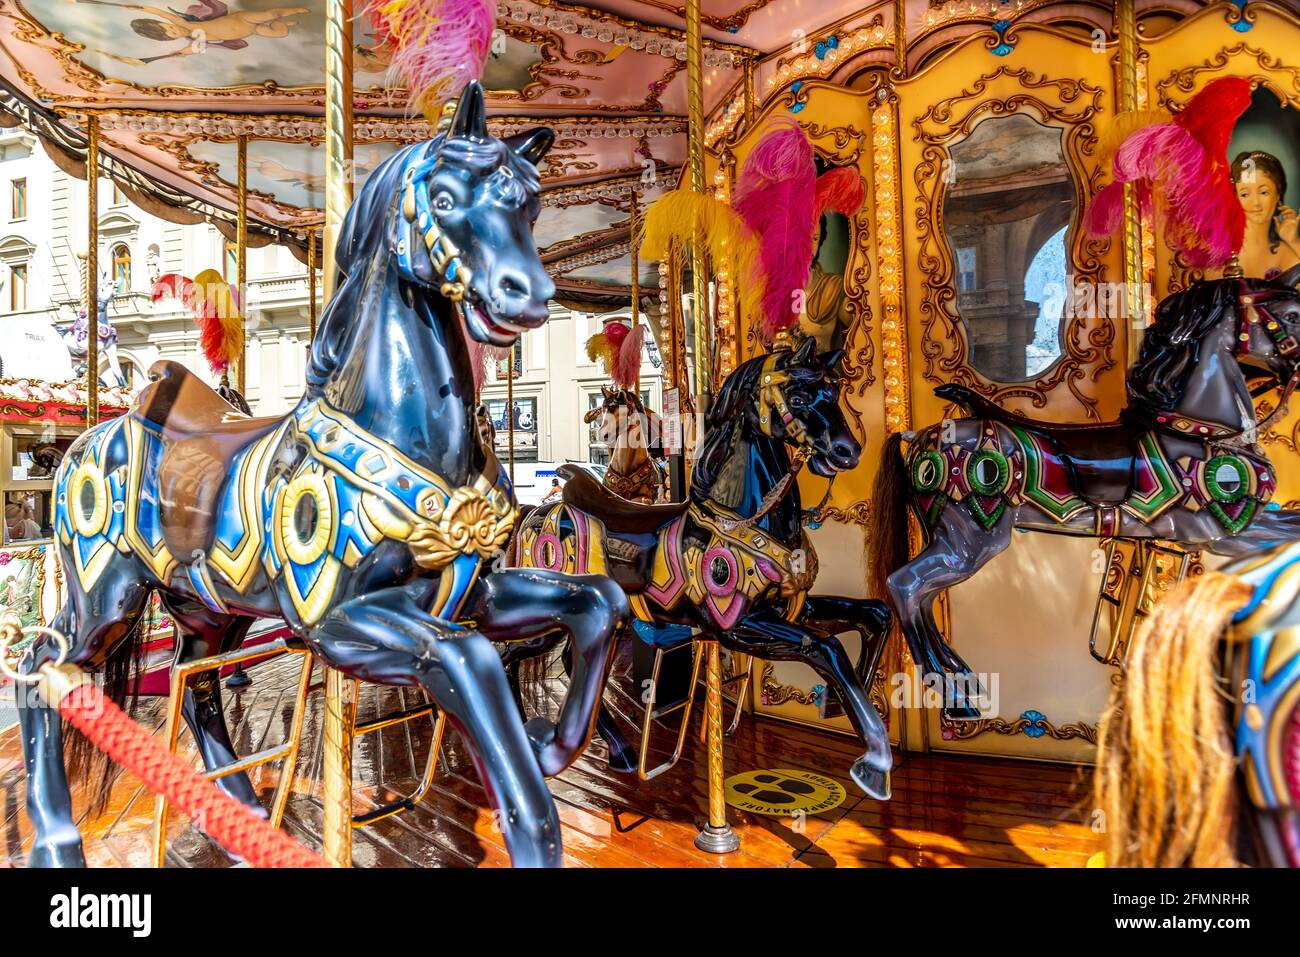 FLORENCE, ITALY - Aug 24, 2020: Florence, Toscana/Italy - 24.08.2020: A very pretty and elaborately decorated children's carousel with black horses an Stock Photo